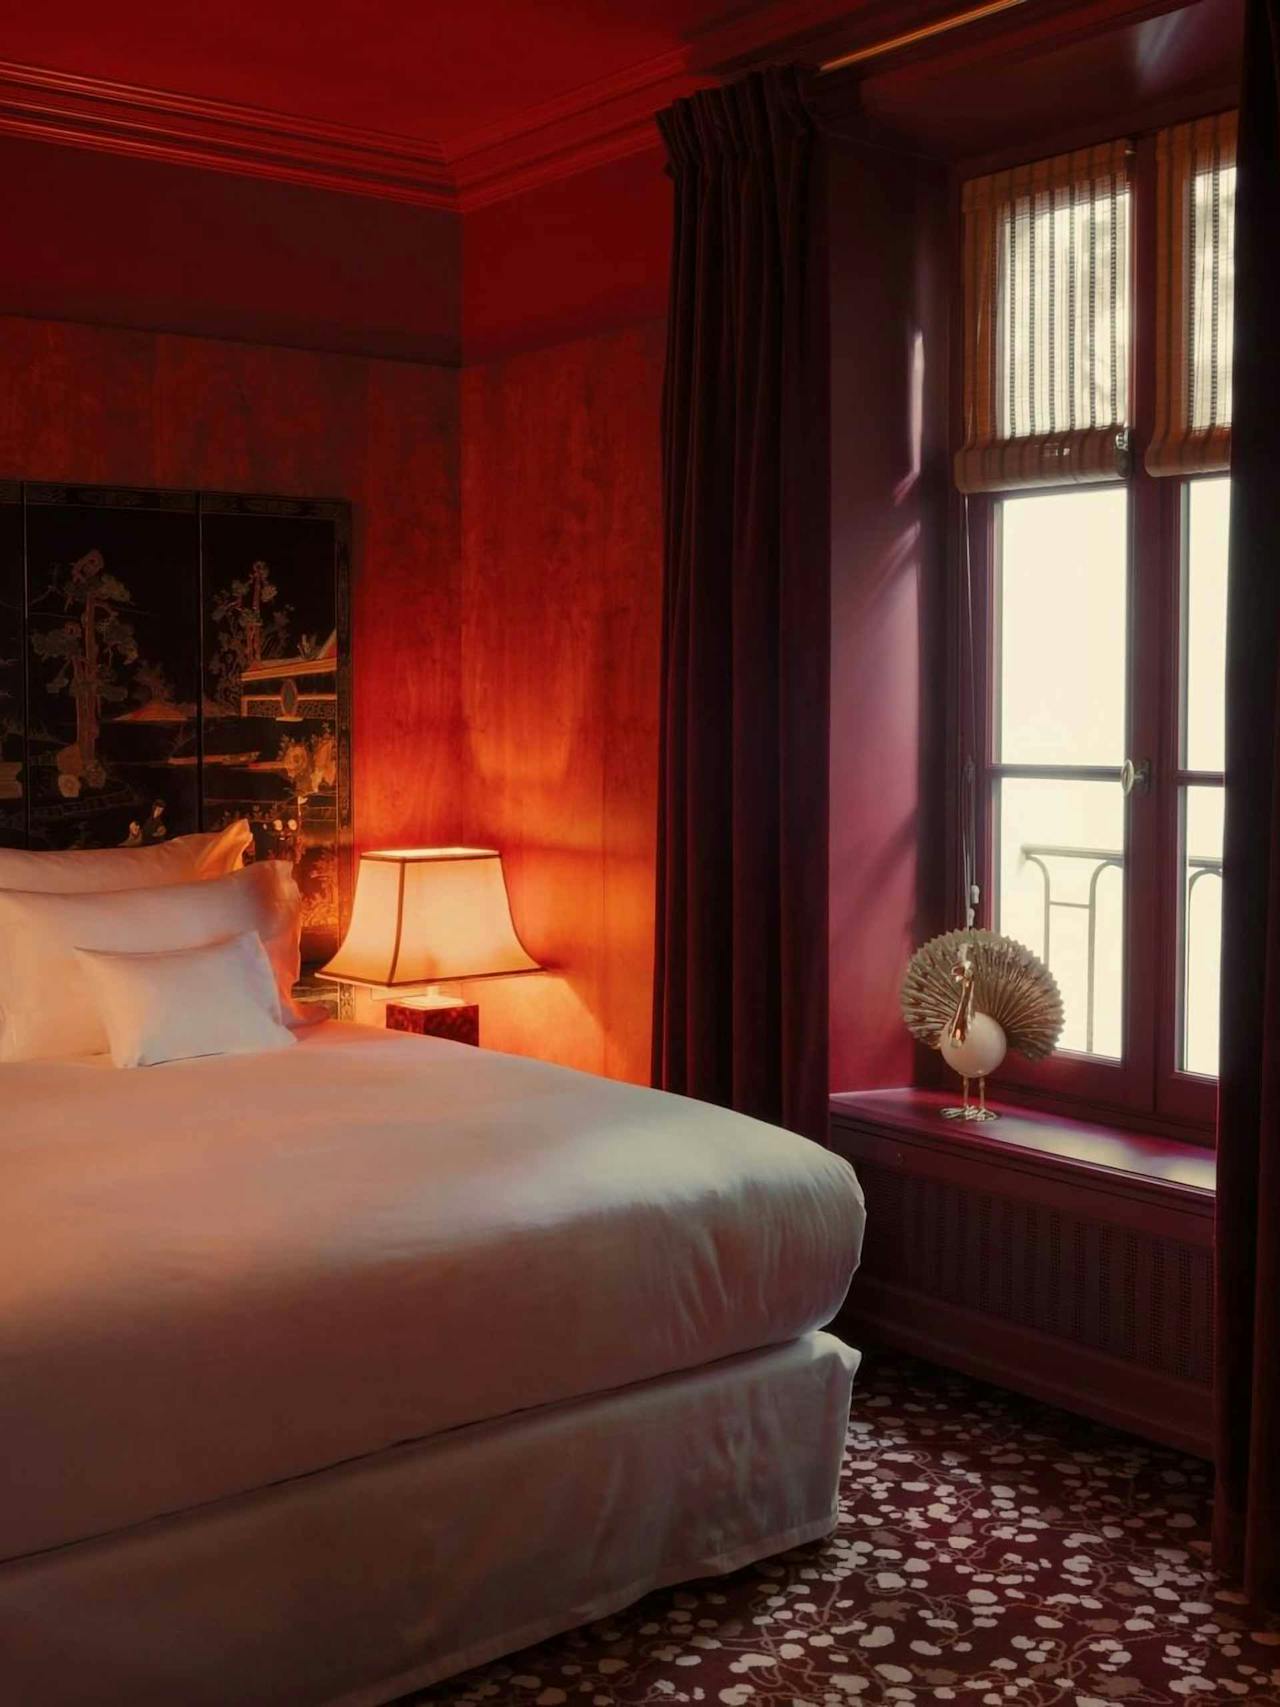 Image: @hotelparticuliermontmartre